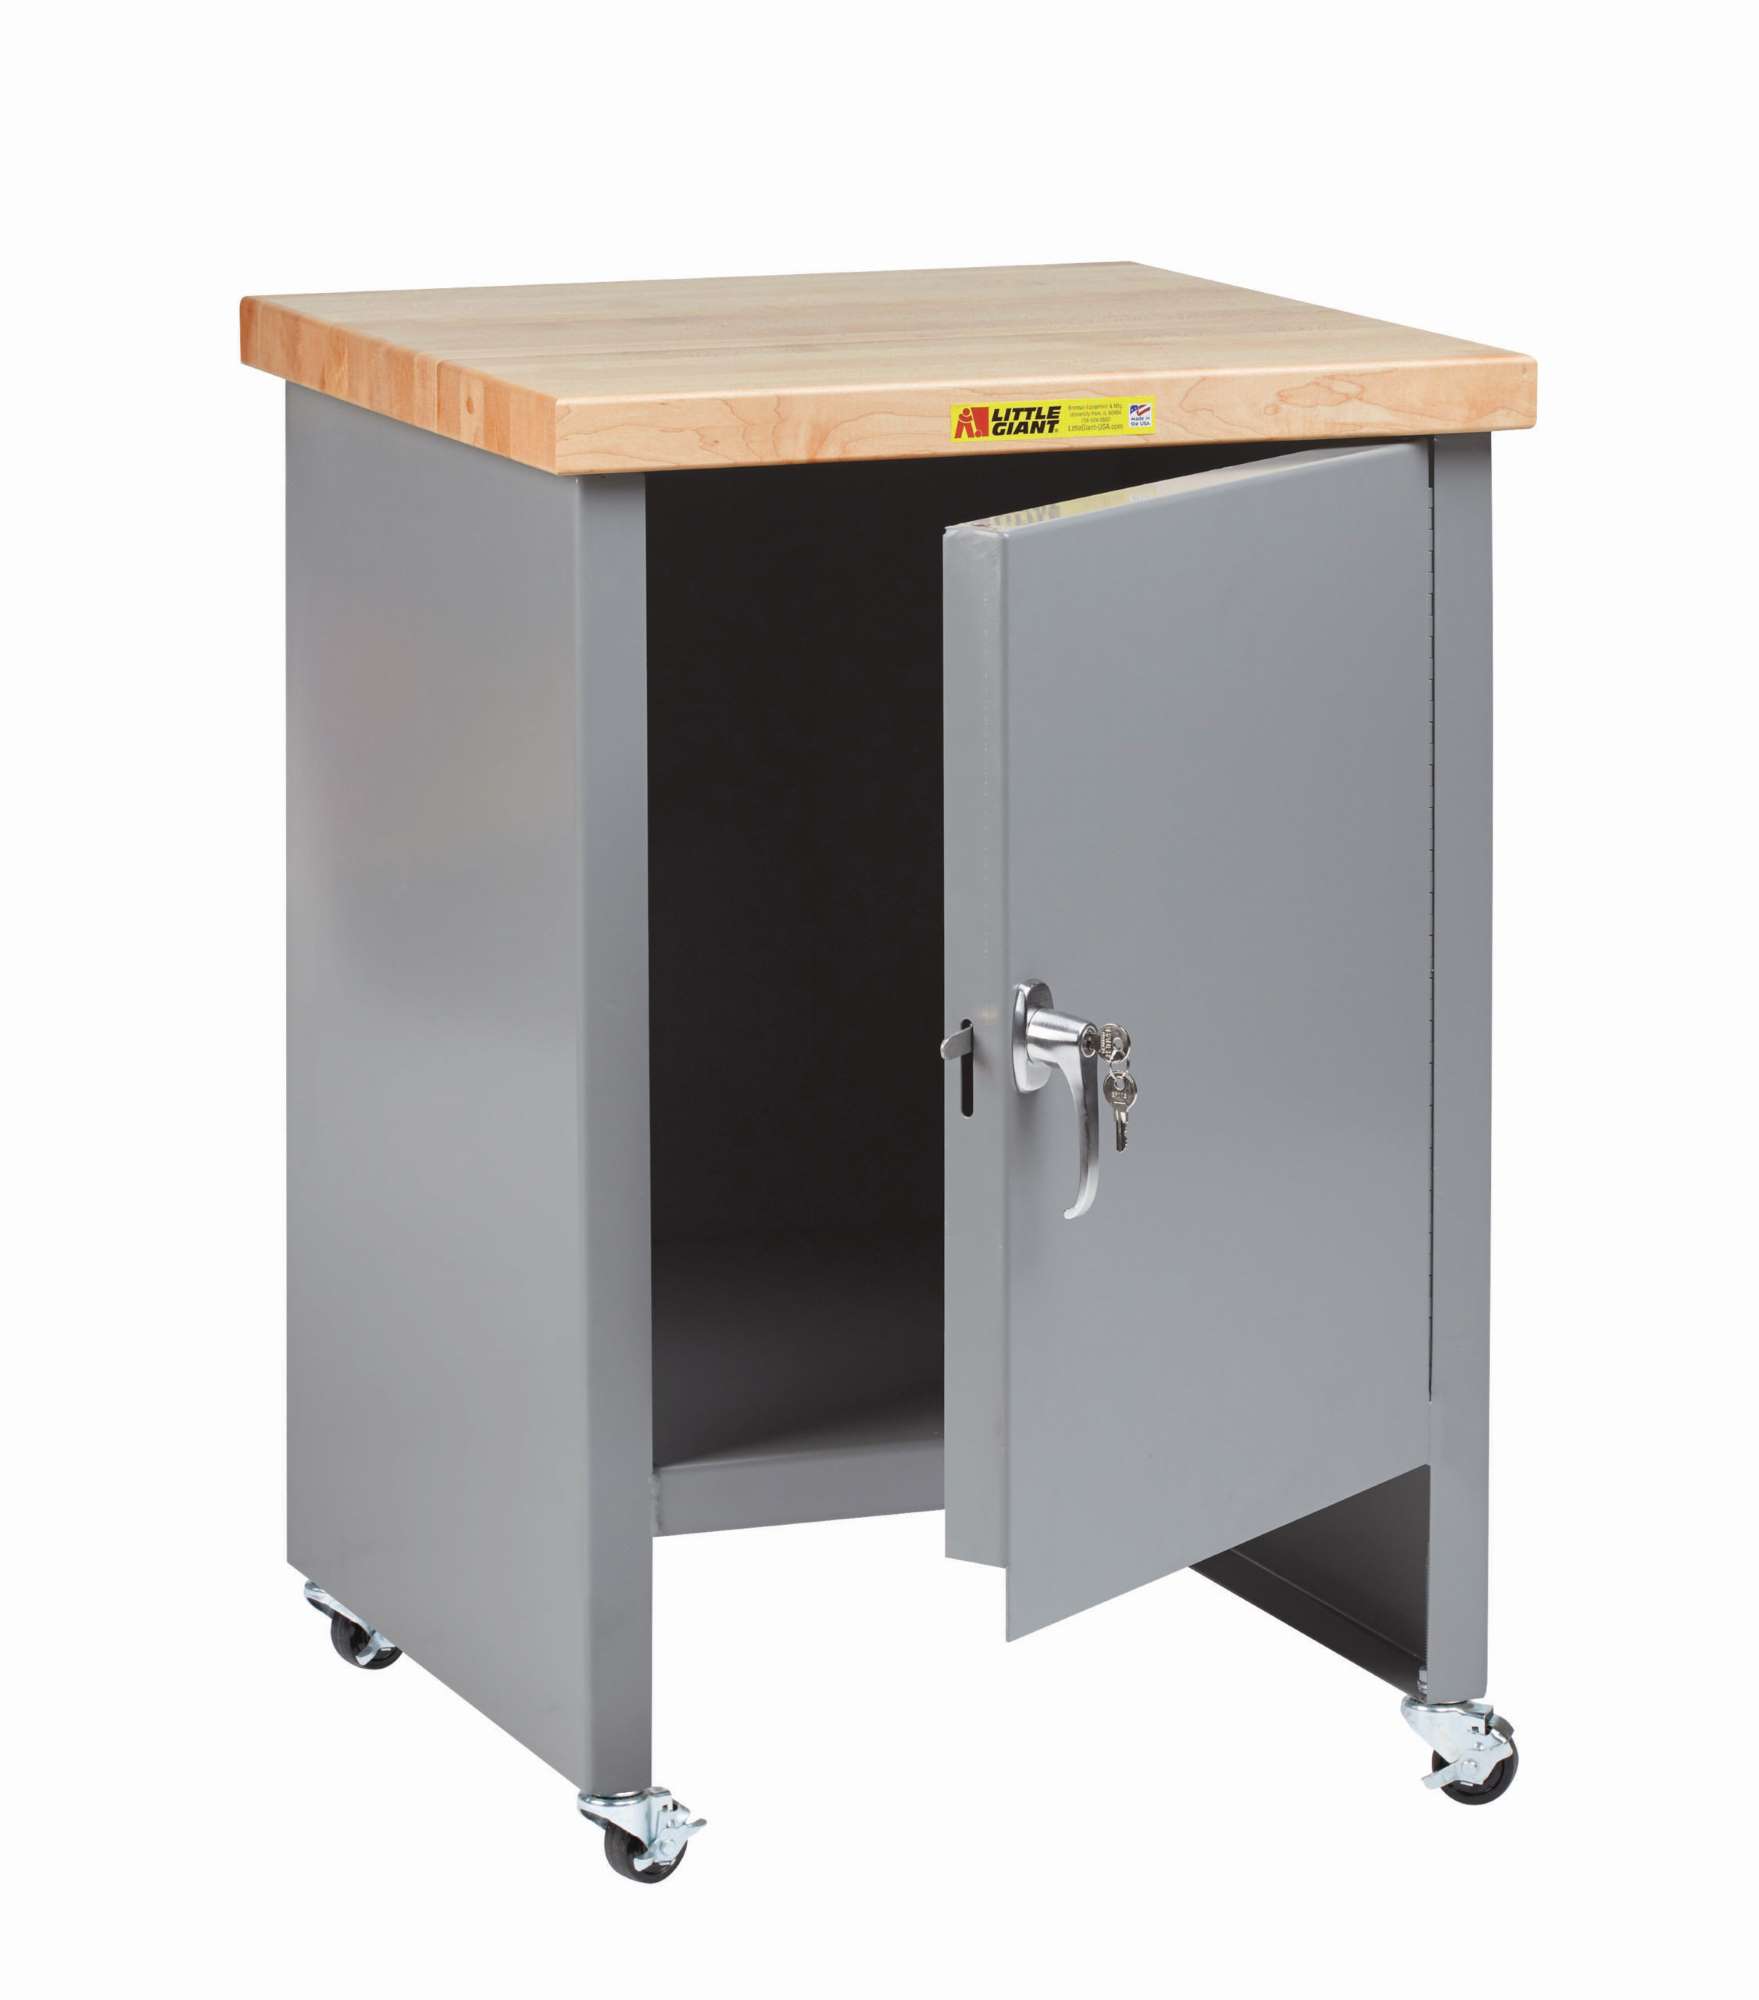 Compact Work Center Cabinet with Locking Door, 3" Rubber Stem Casters